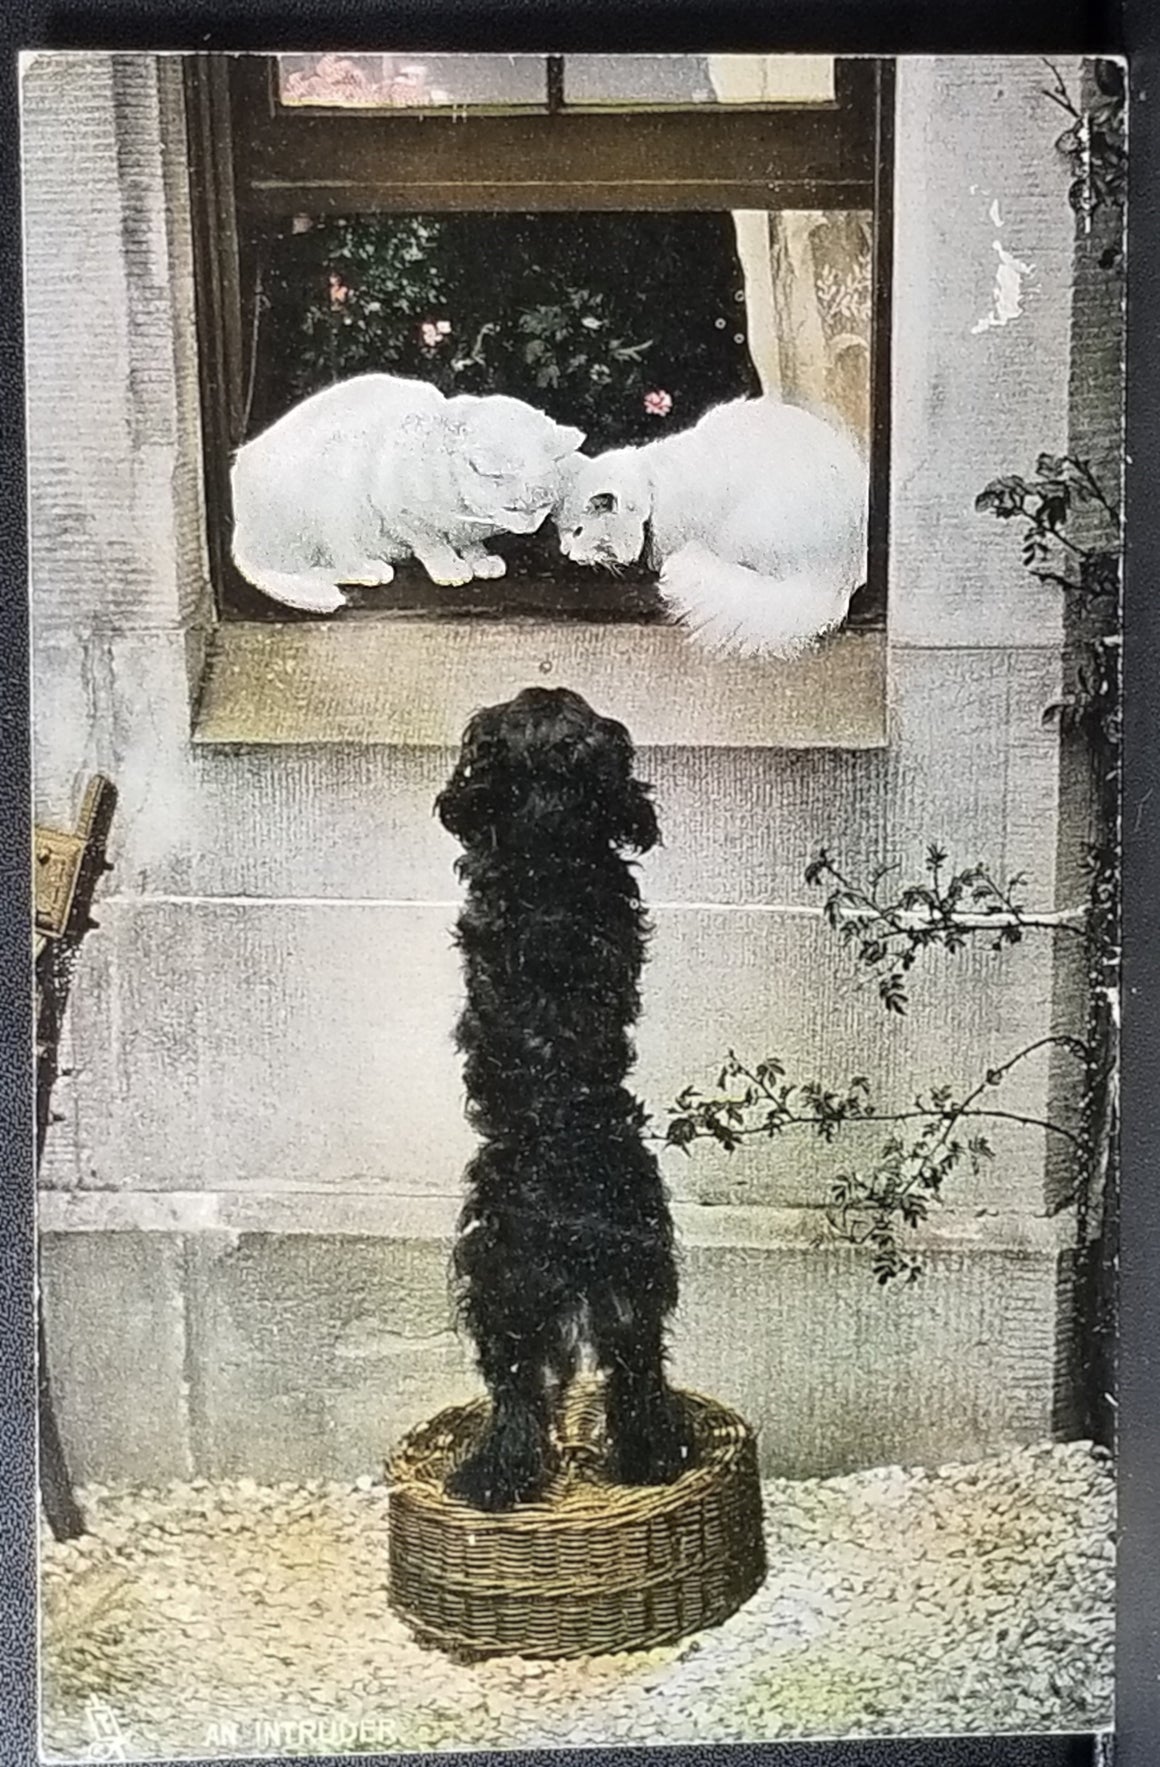 Animal Postcard Black Fur Dog Visiting Two White Cats in Window "The Intruder" Raphael Tuck Photochrome Card